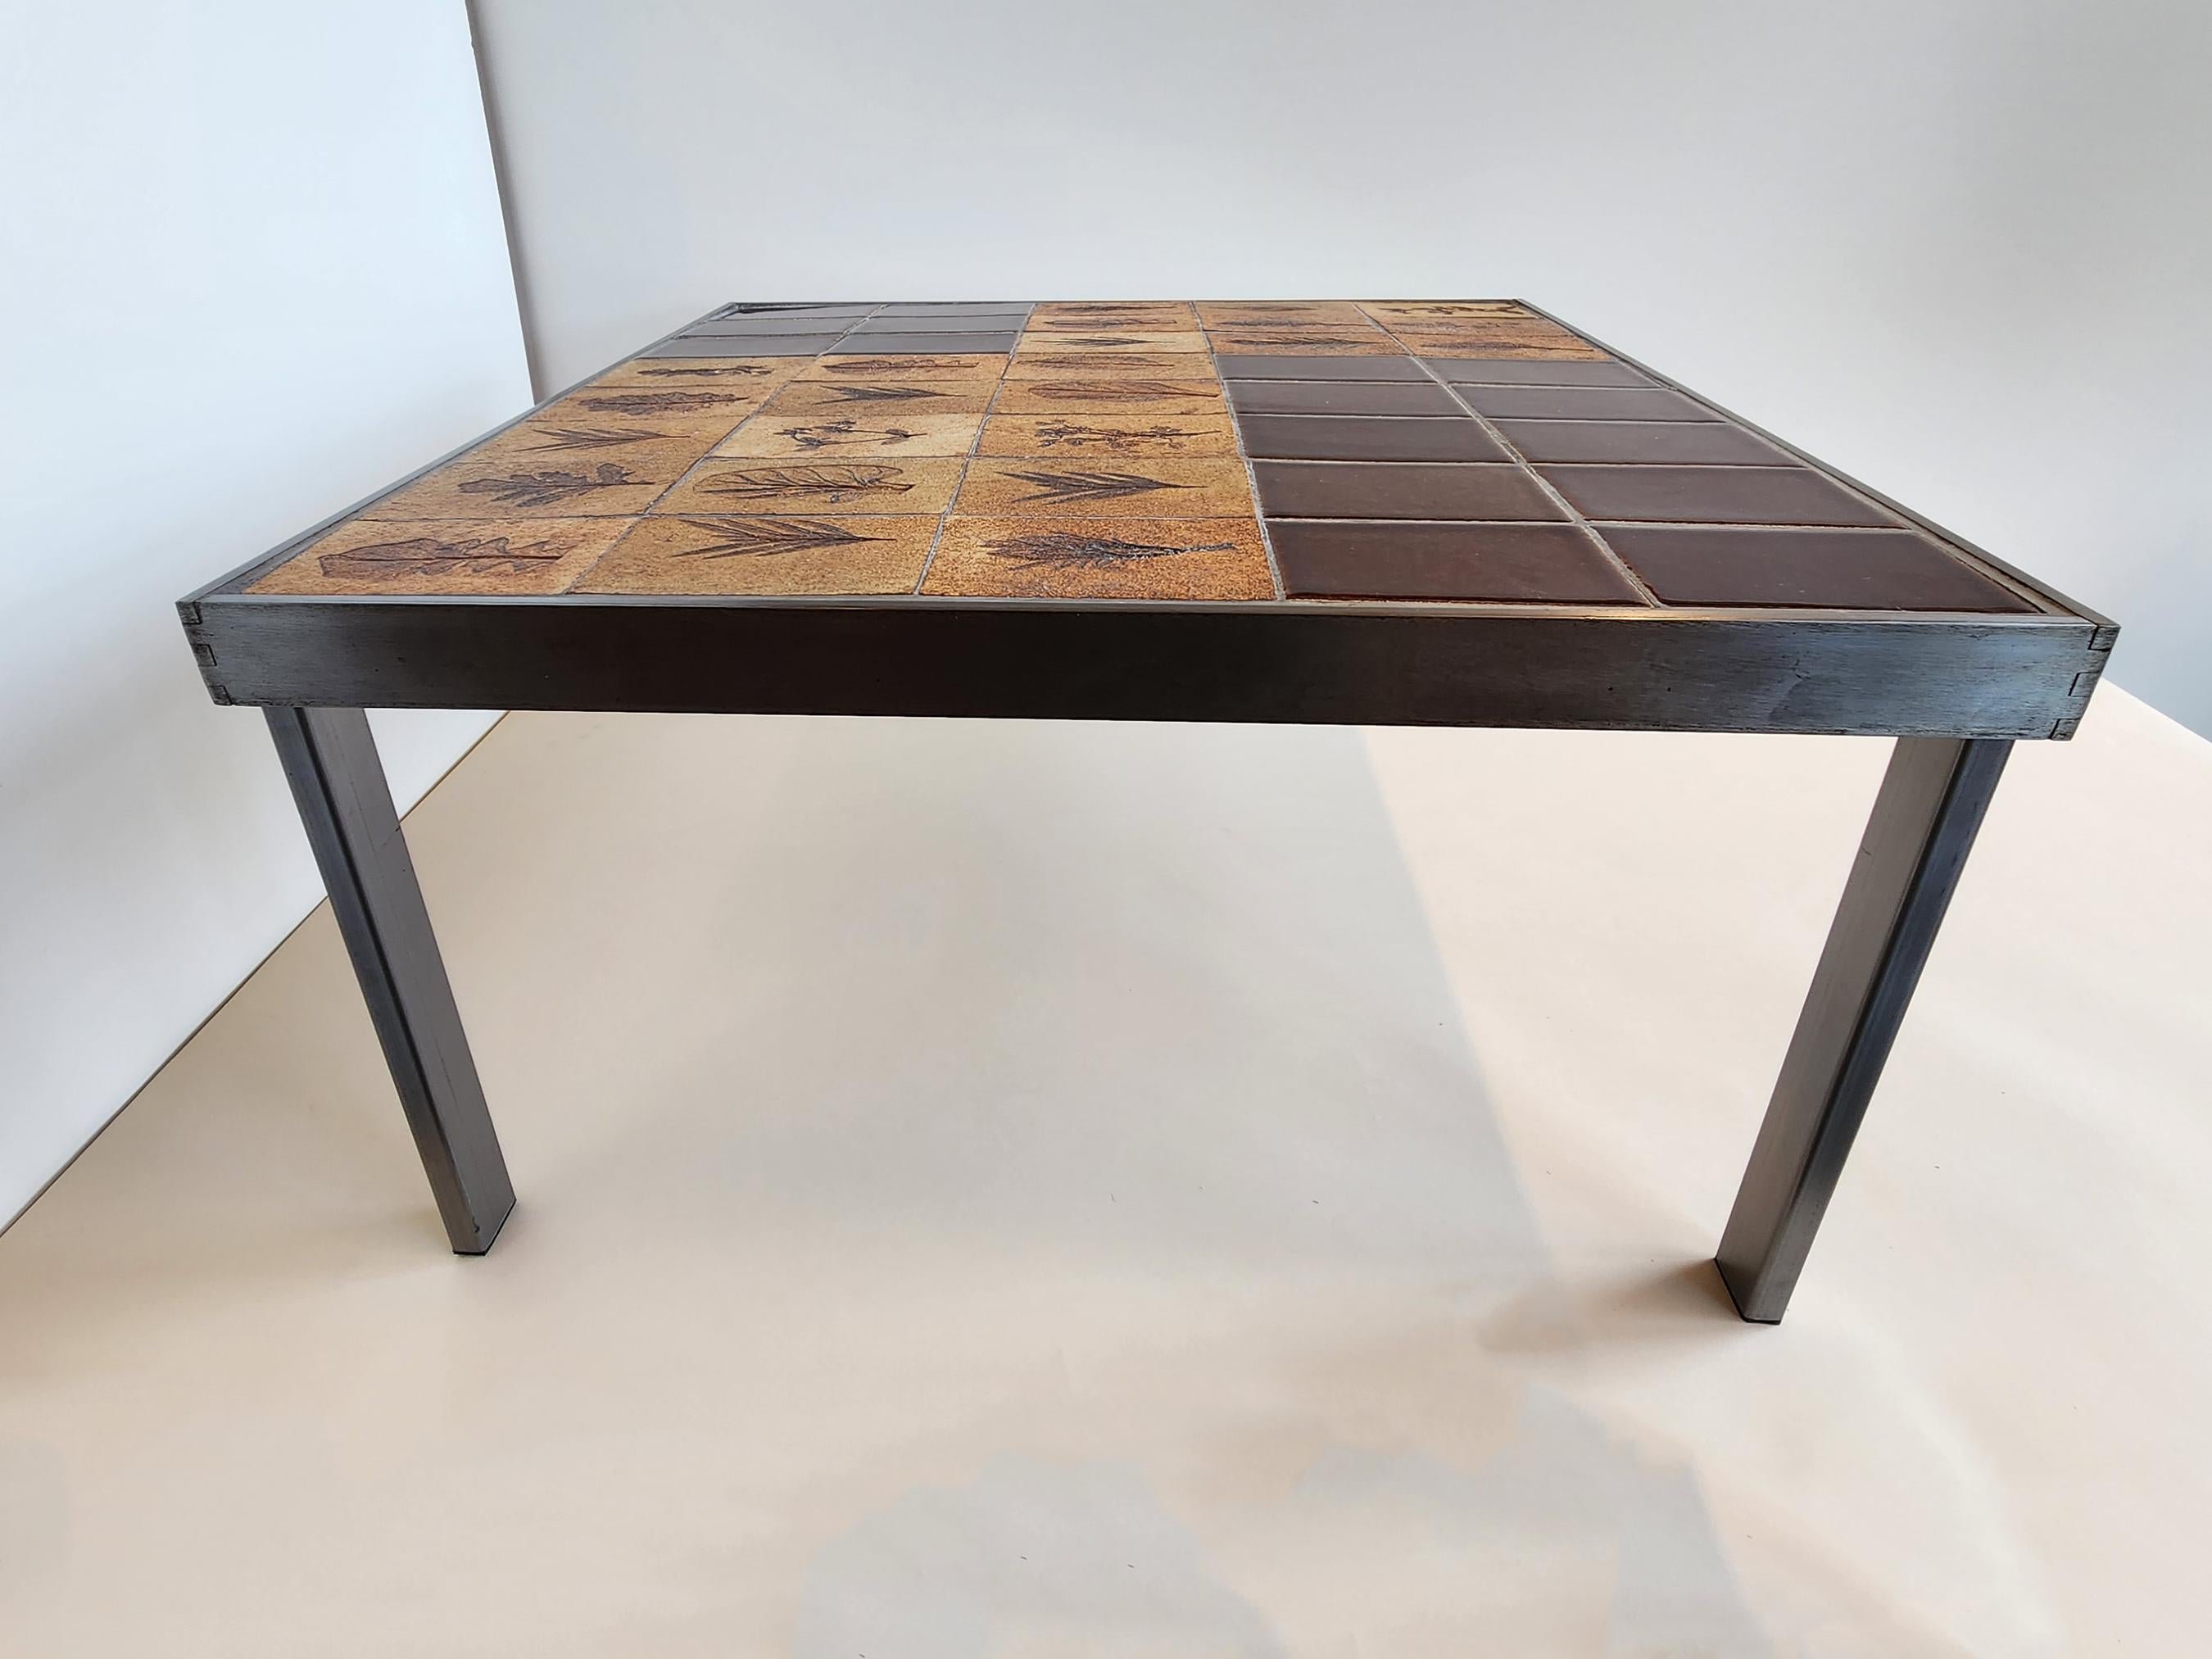 Roger Capron - End Table, Garrigue + Brown Ceramic Tiles, Dovetail Metal Frame In Good Condition For Sale In Stratford, CT